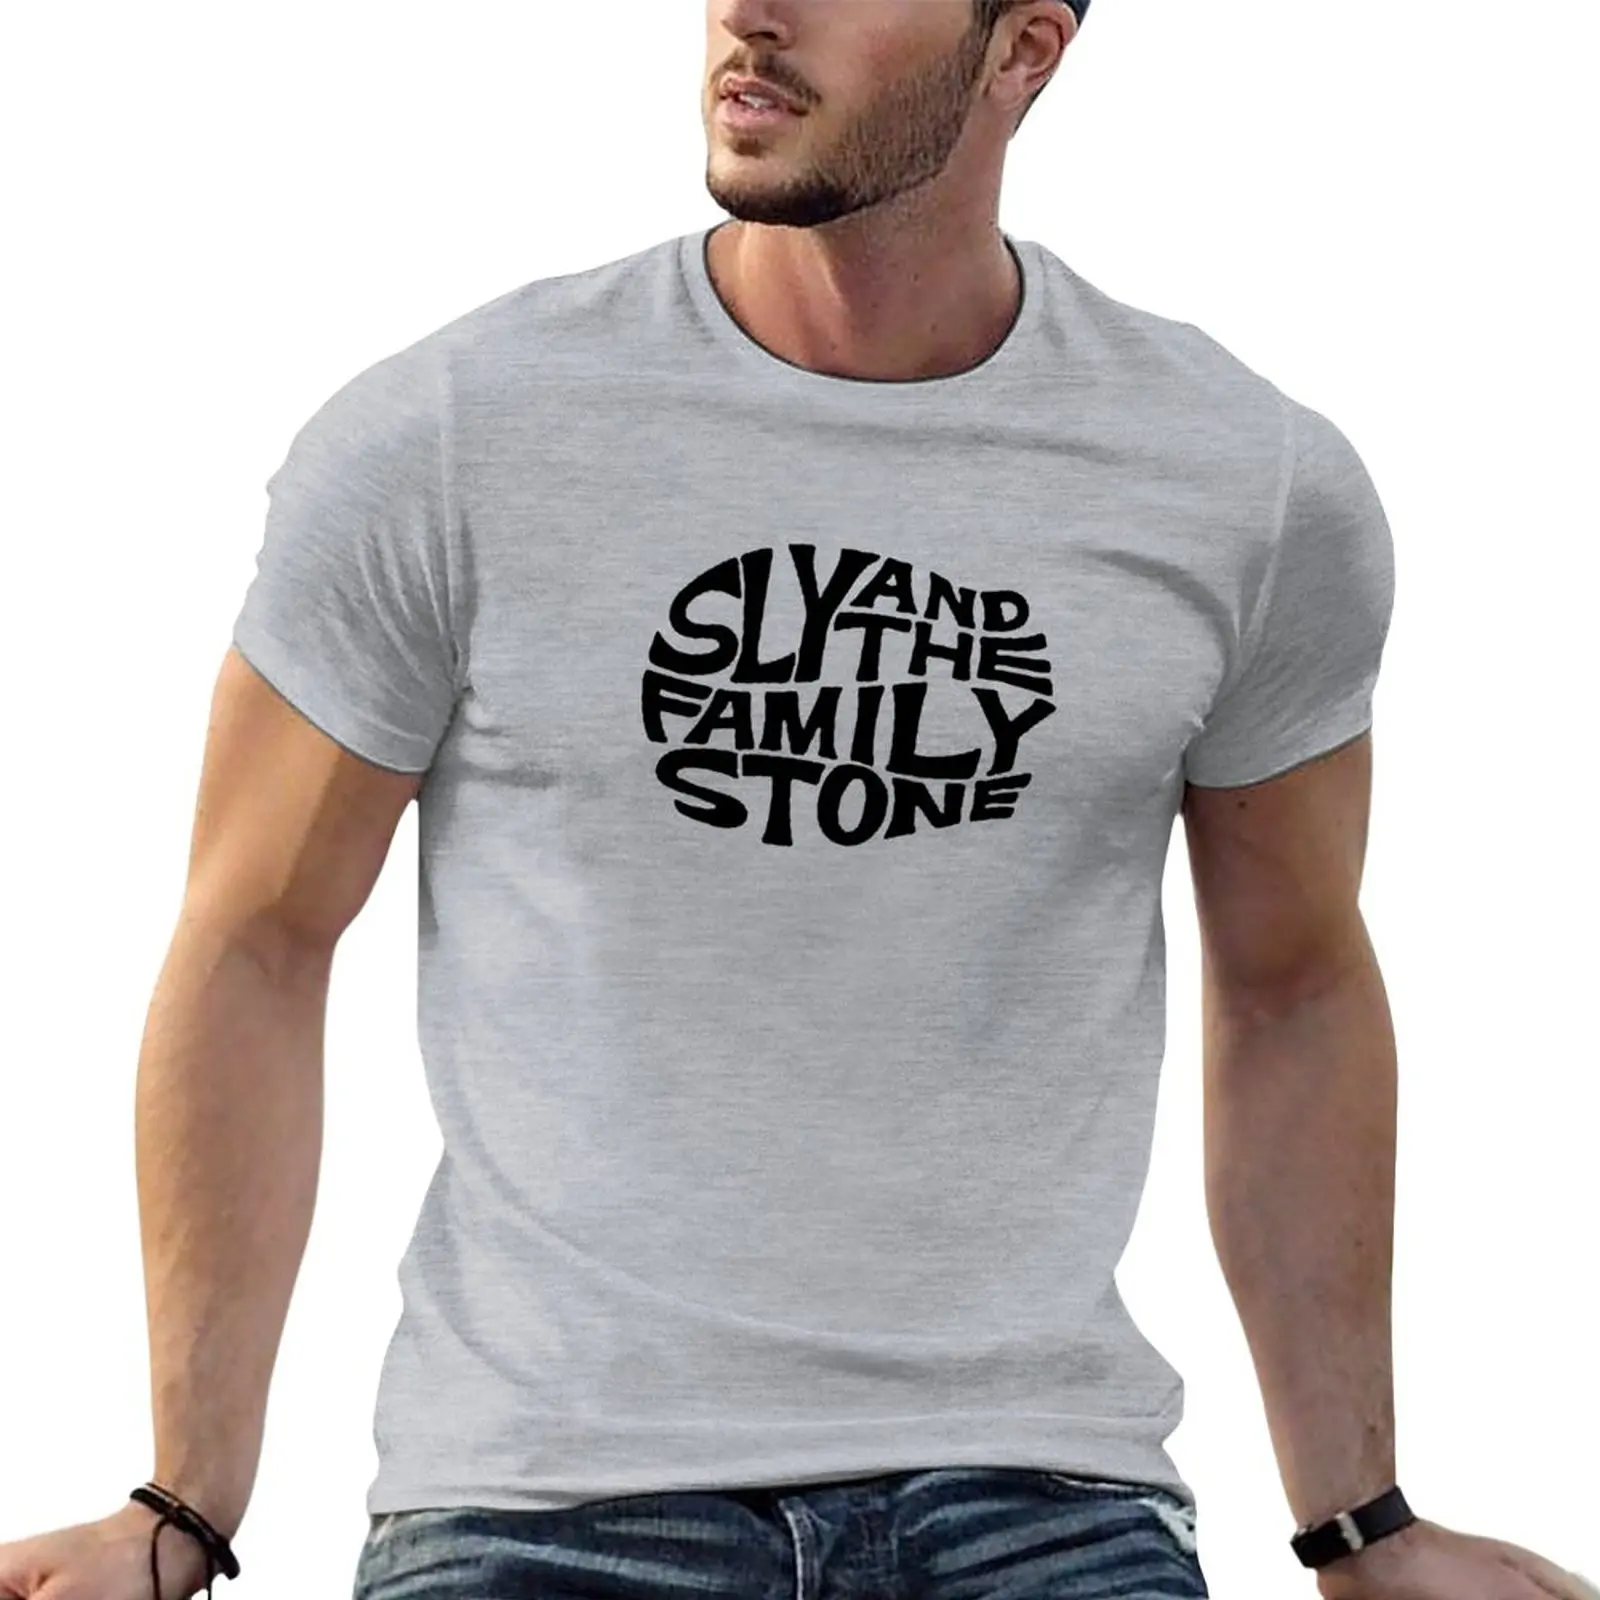 New Sly and the Family Stone T-Shirt summer tops cute tops shirts graphic tees black t-shirts for men new 2021 cool fashion t shirt for men and women gorgeous laser 3d t shirt summer short sleeve tops male t shirts summer tees